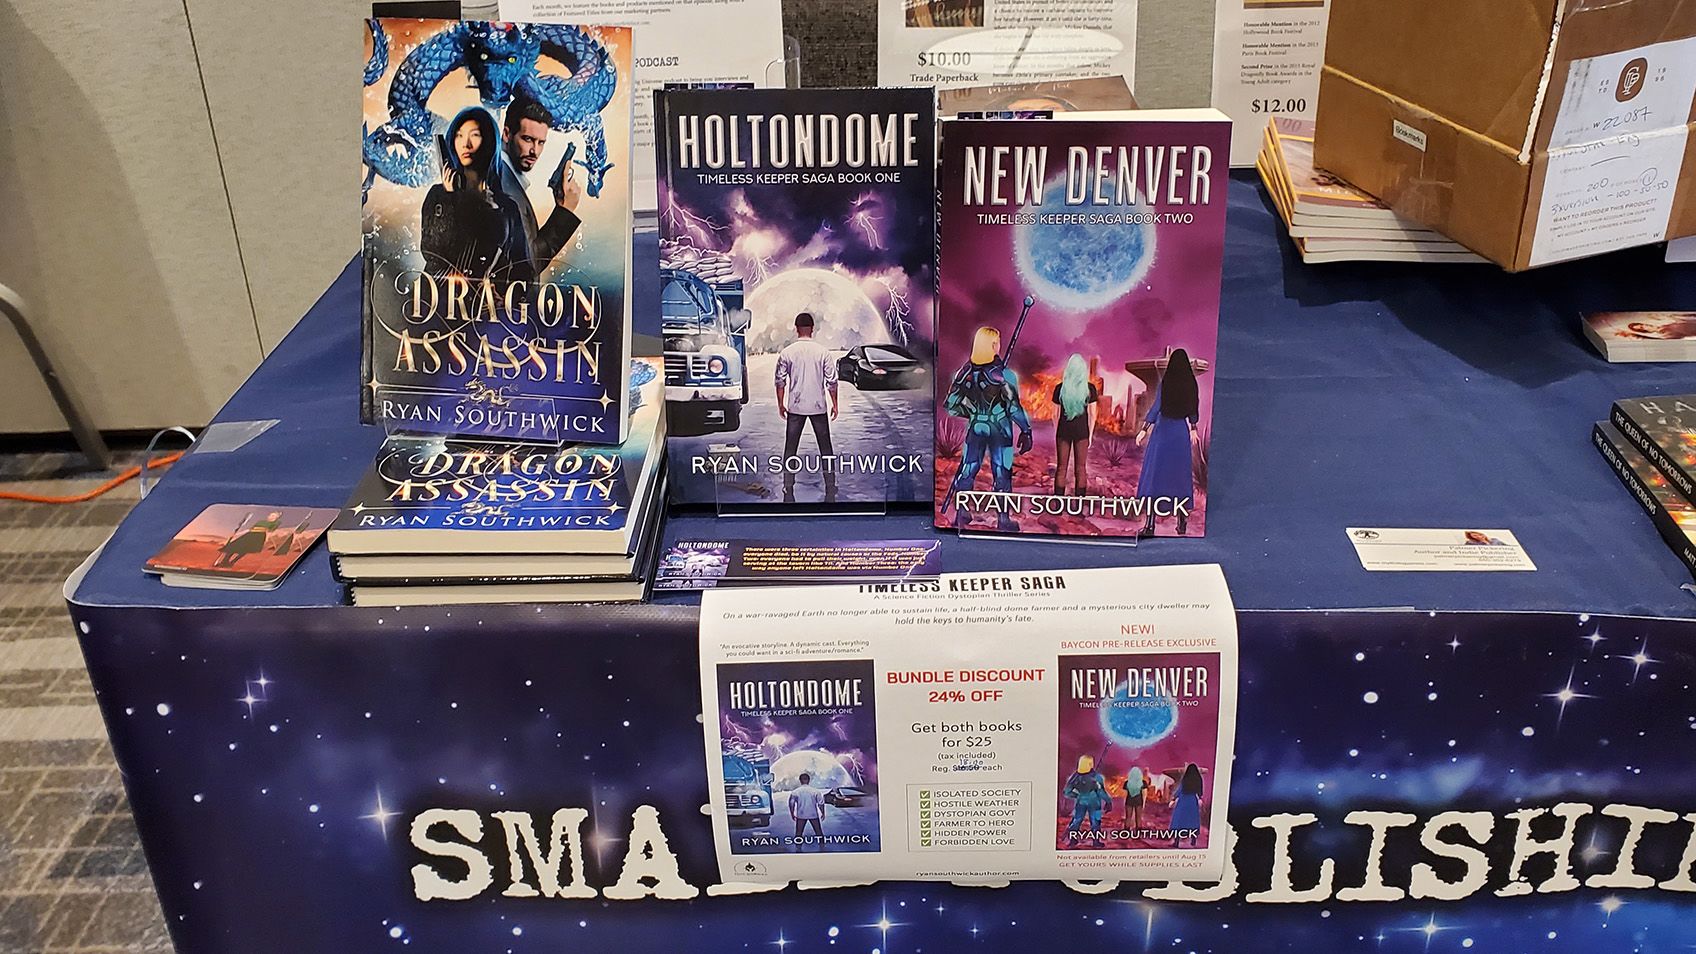 3 books standing up on a table: Dragon Assassin, Holtondome, New Denver. A discount sign in front.